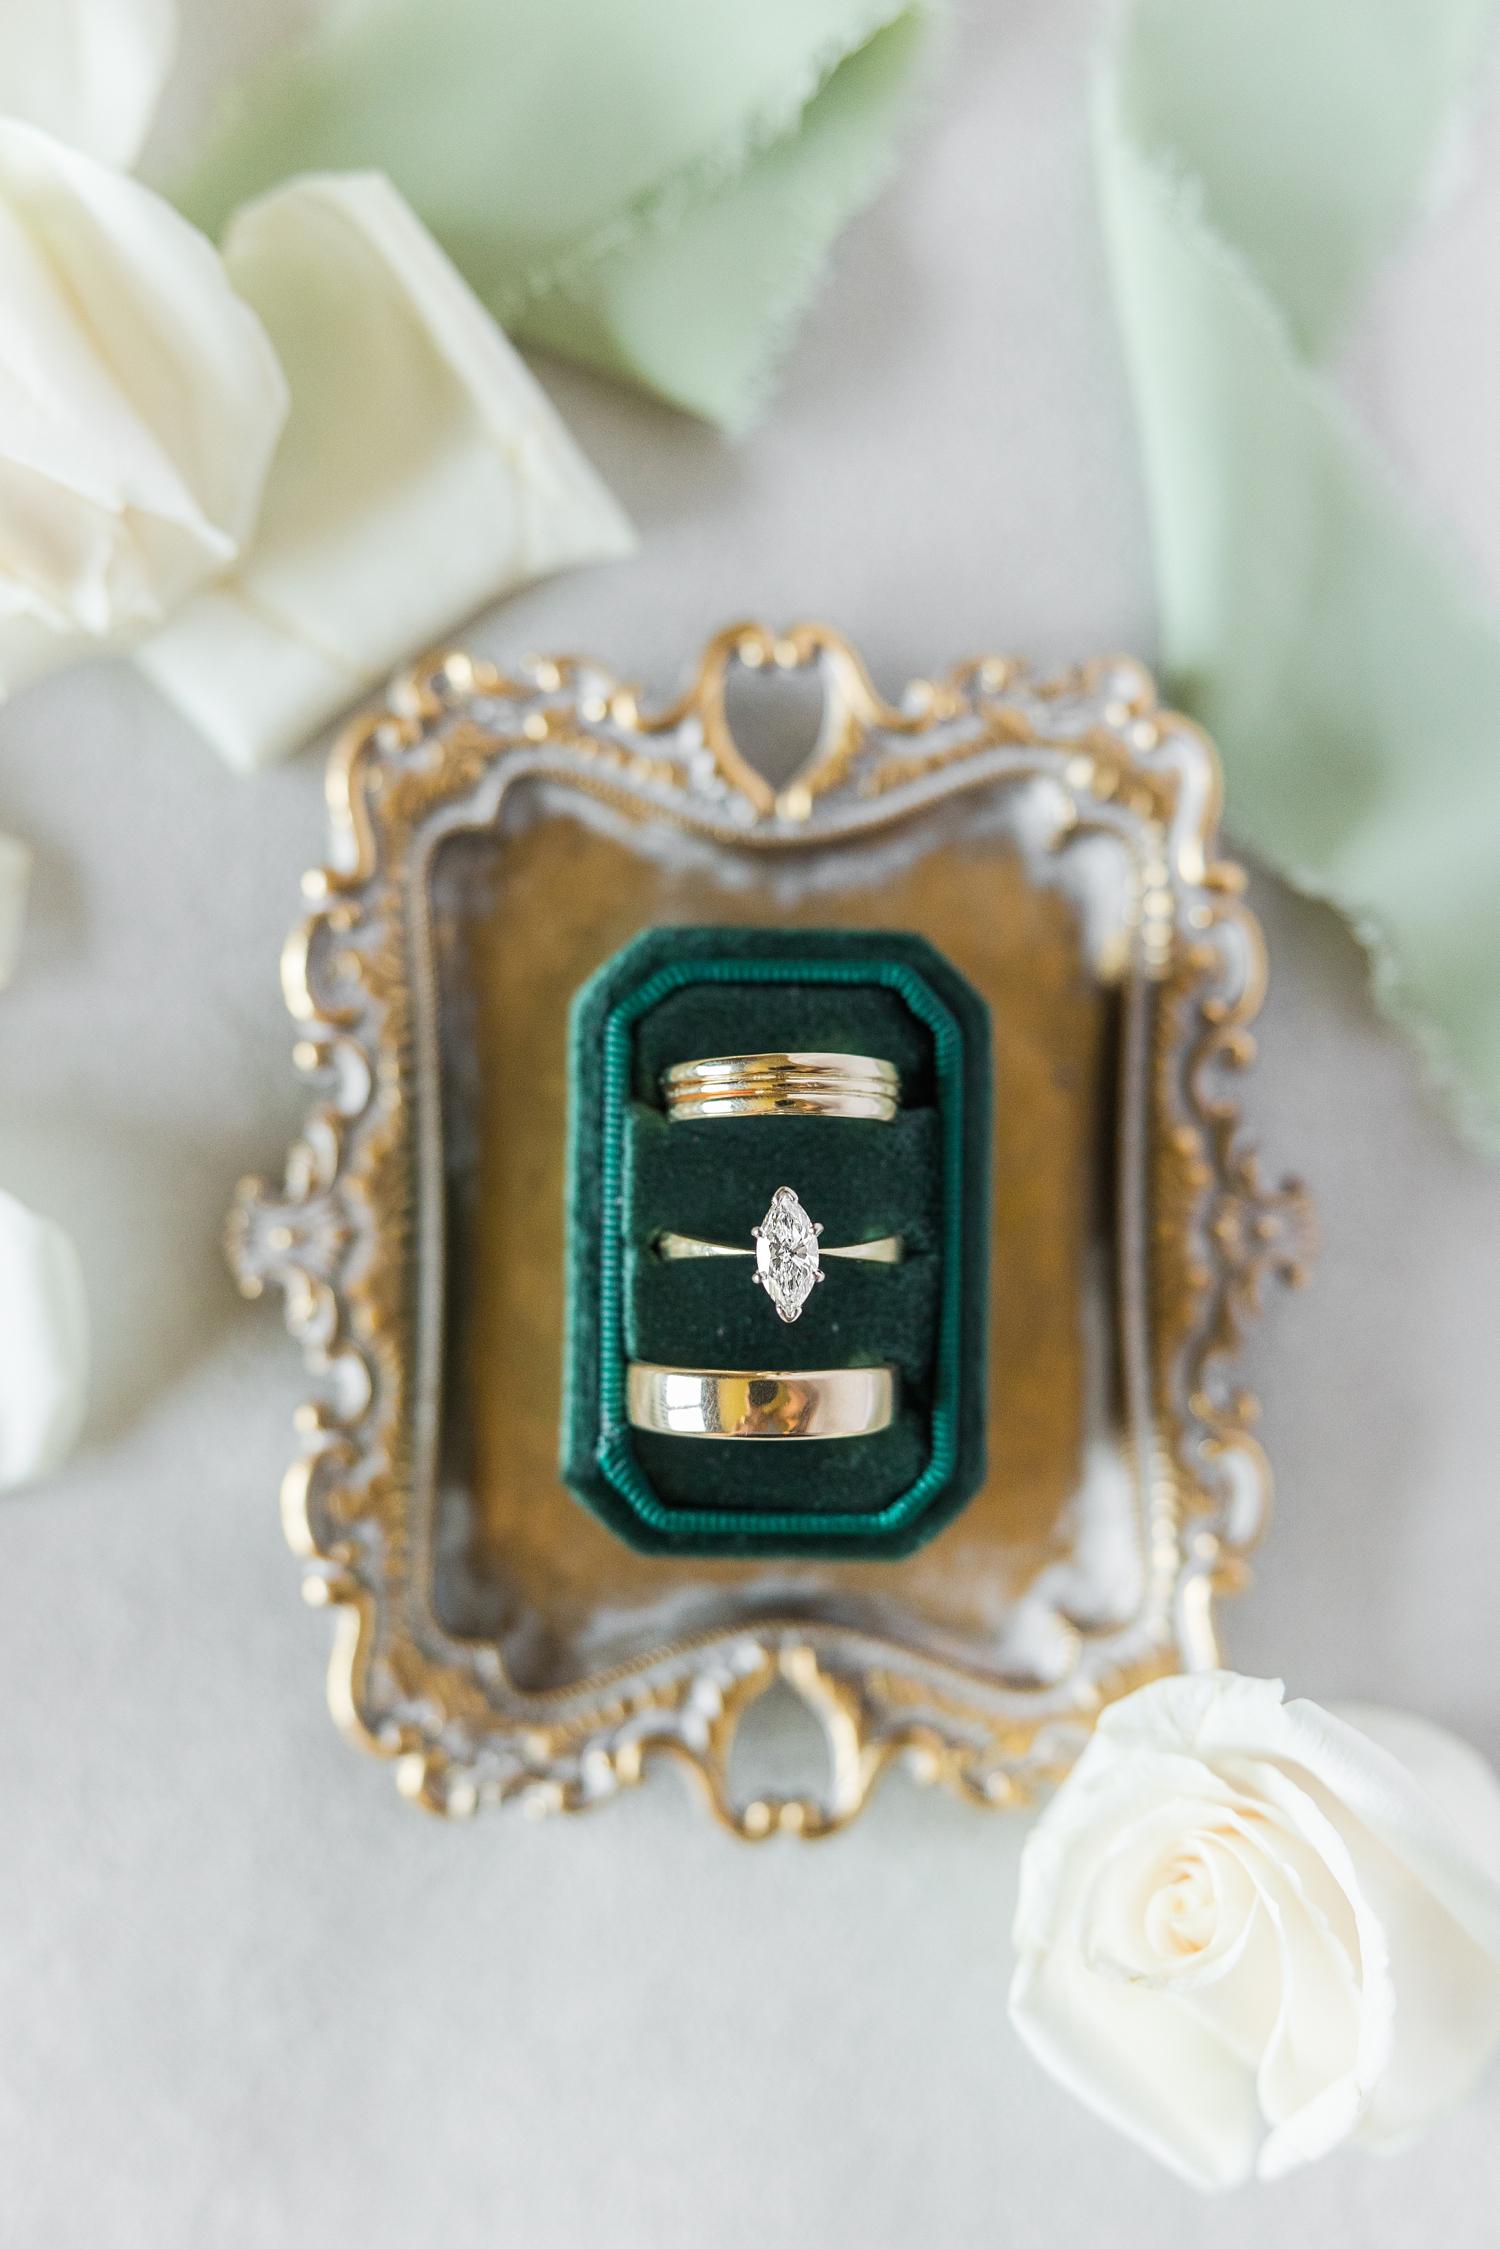 Gold wedding bands and a marquee cut solitaire engagement ring sit nestled in an emerald green Mrs. Box sitting on top of a gold ornate tray surrounded by white roses and sage green ribbon | CB Studio